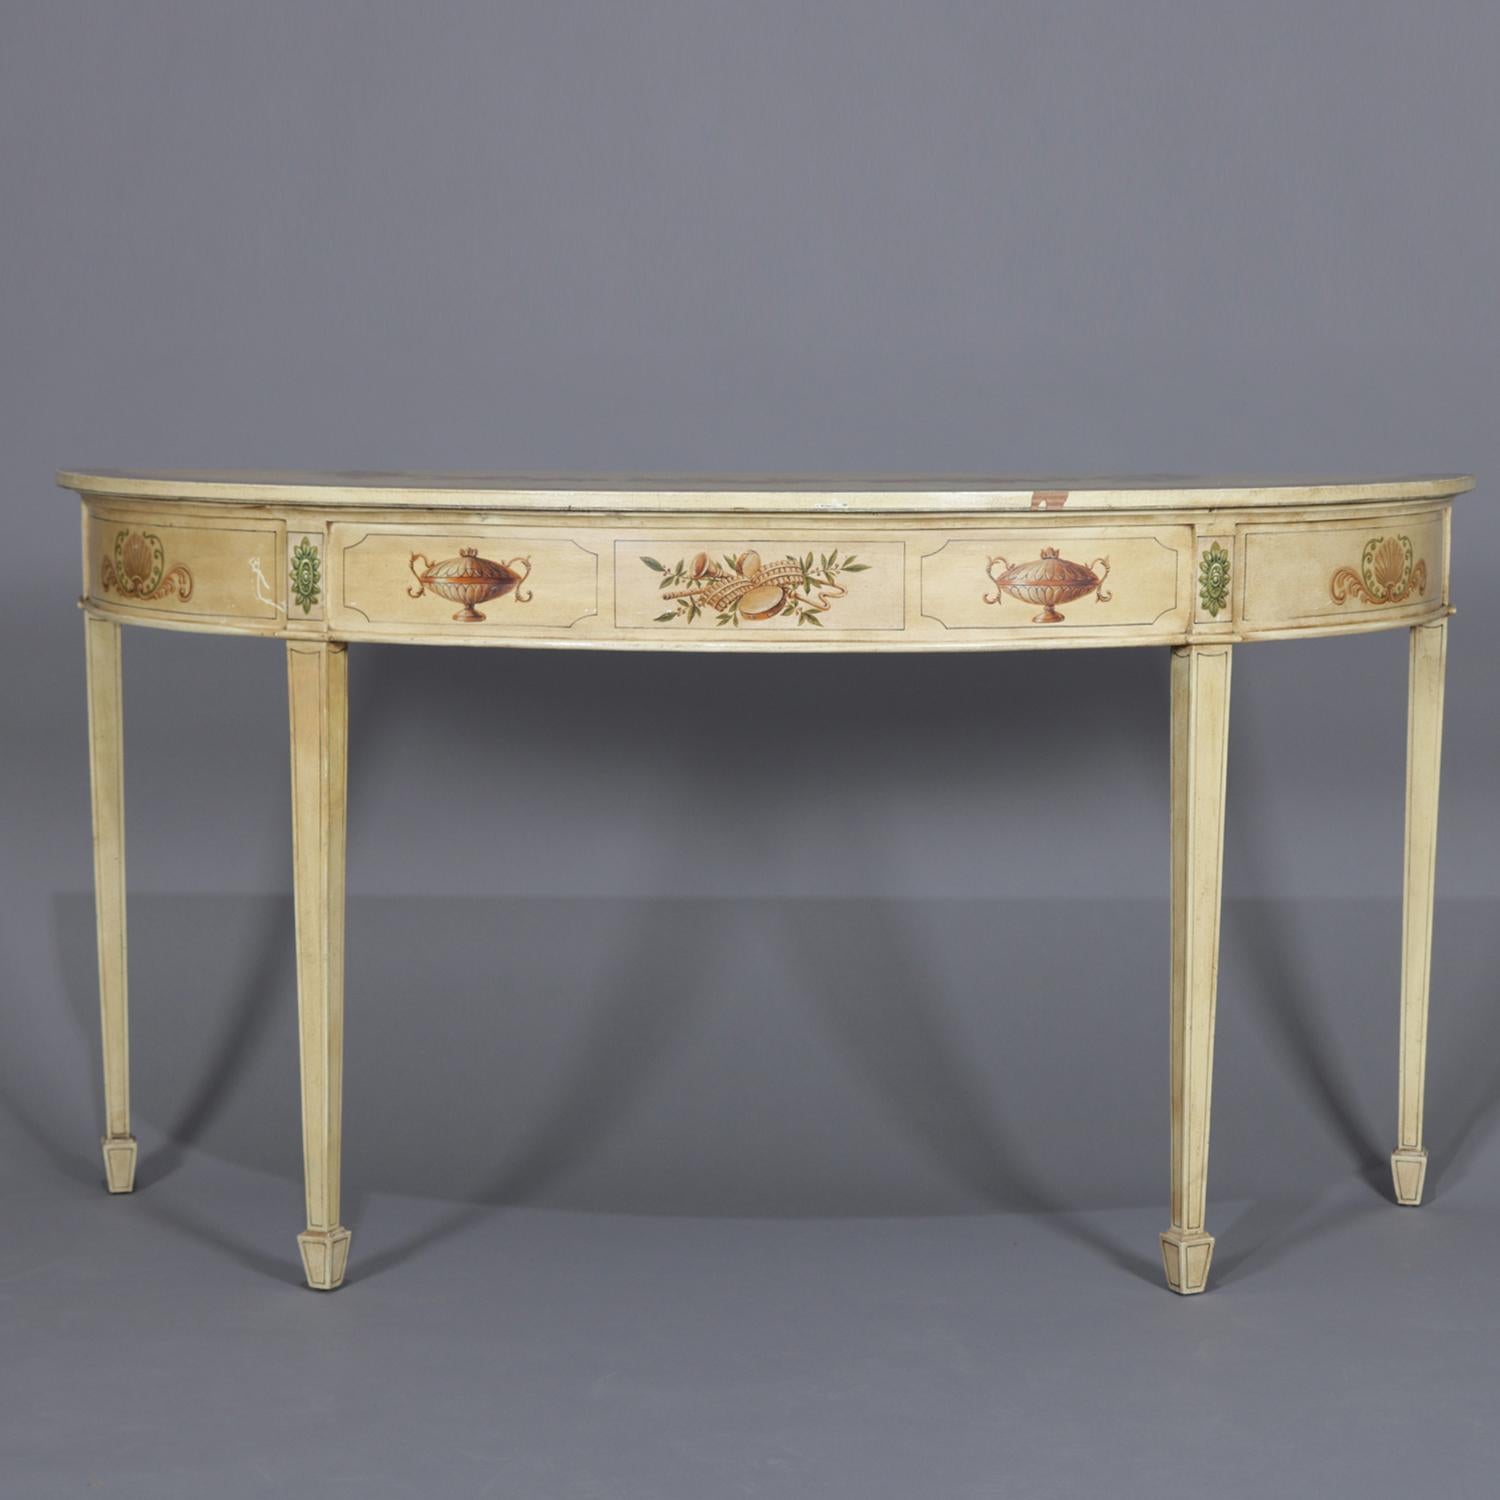 Vintage French Neoclassical Paint & Gilt Decorated Demilune Console Table (Neoklassisch)